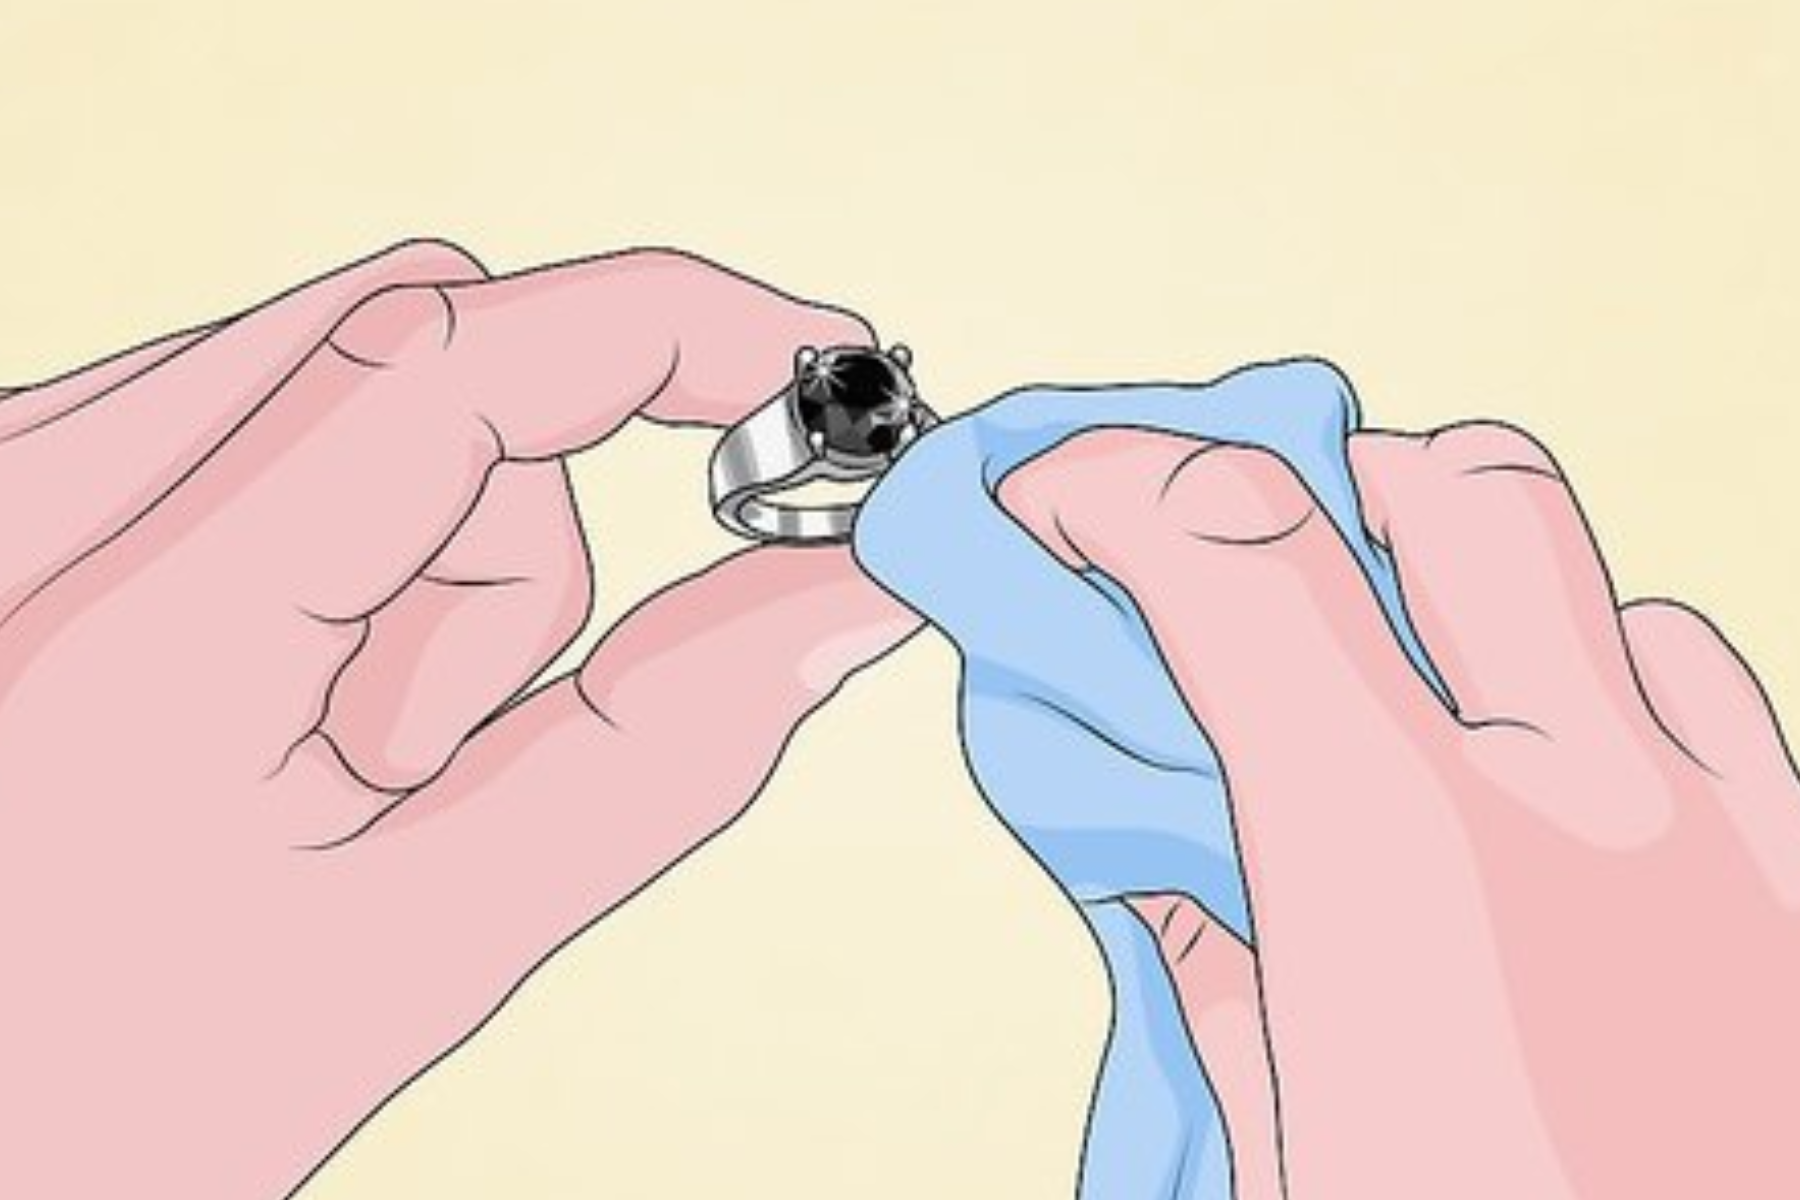 A black diamond engagement ring being cleaned by a man's hand with a blue cloth in an artwork